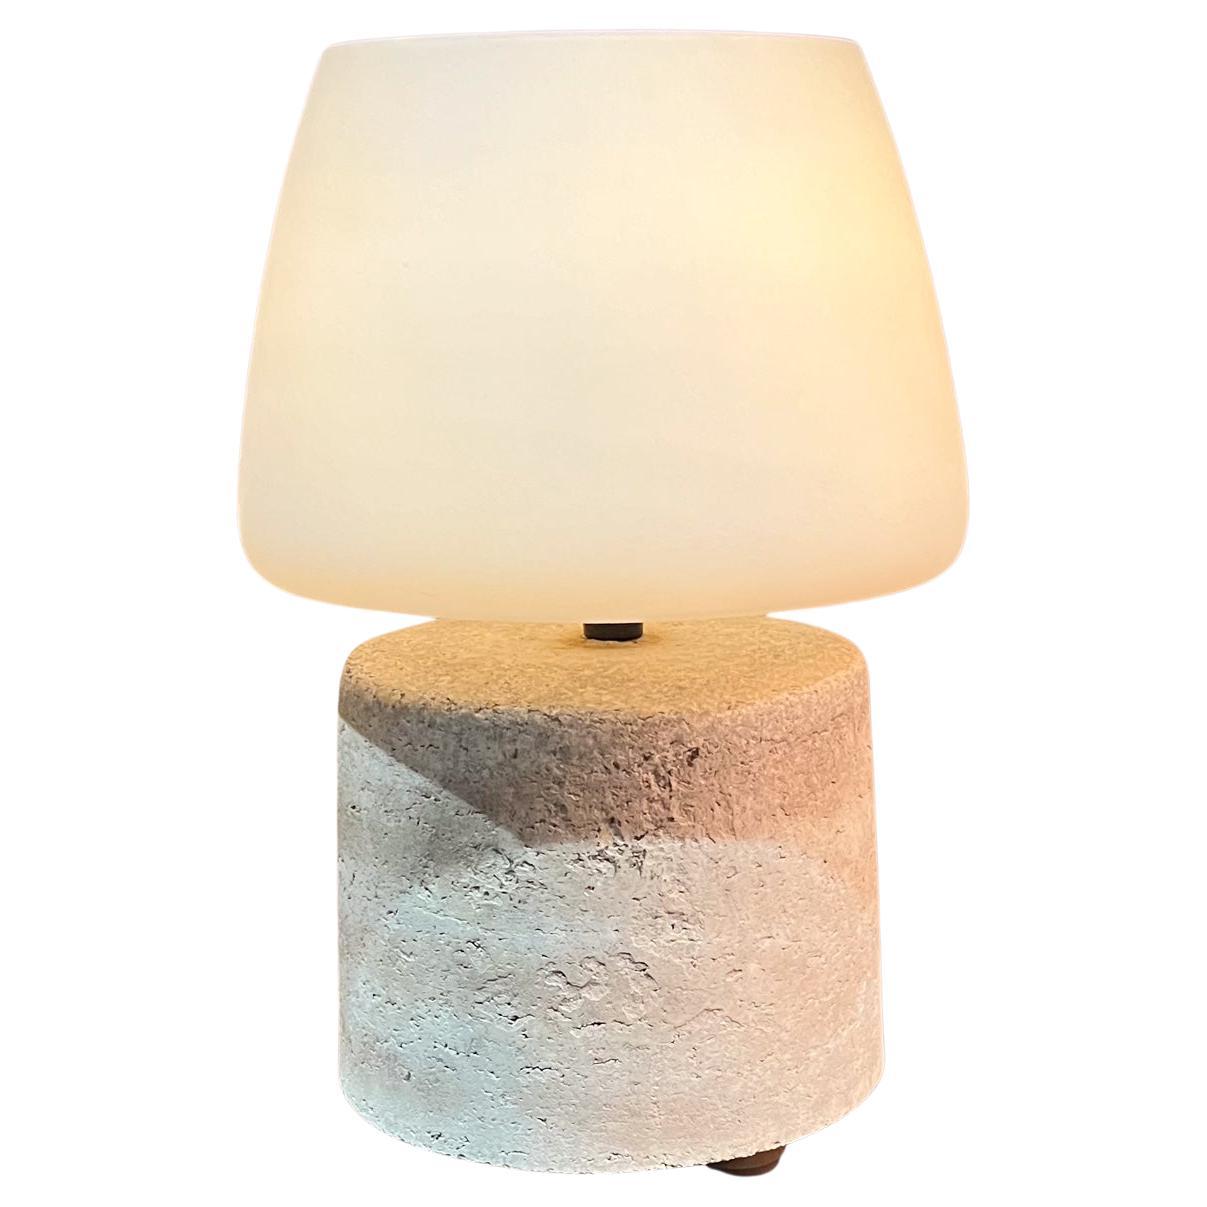  Studio Table Lamp Rammed Raw Earth Frosted Glass Shade